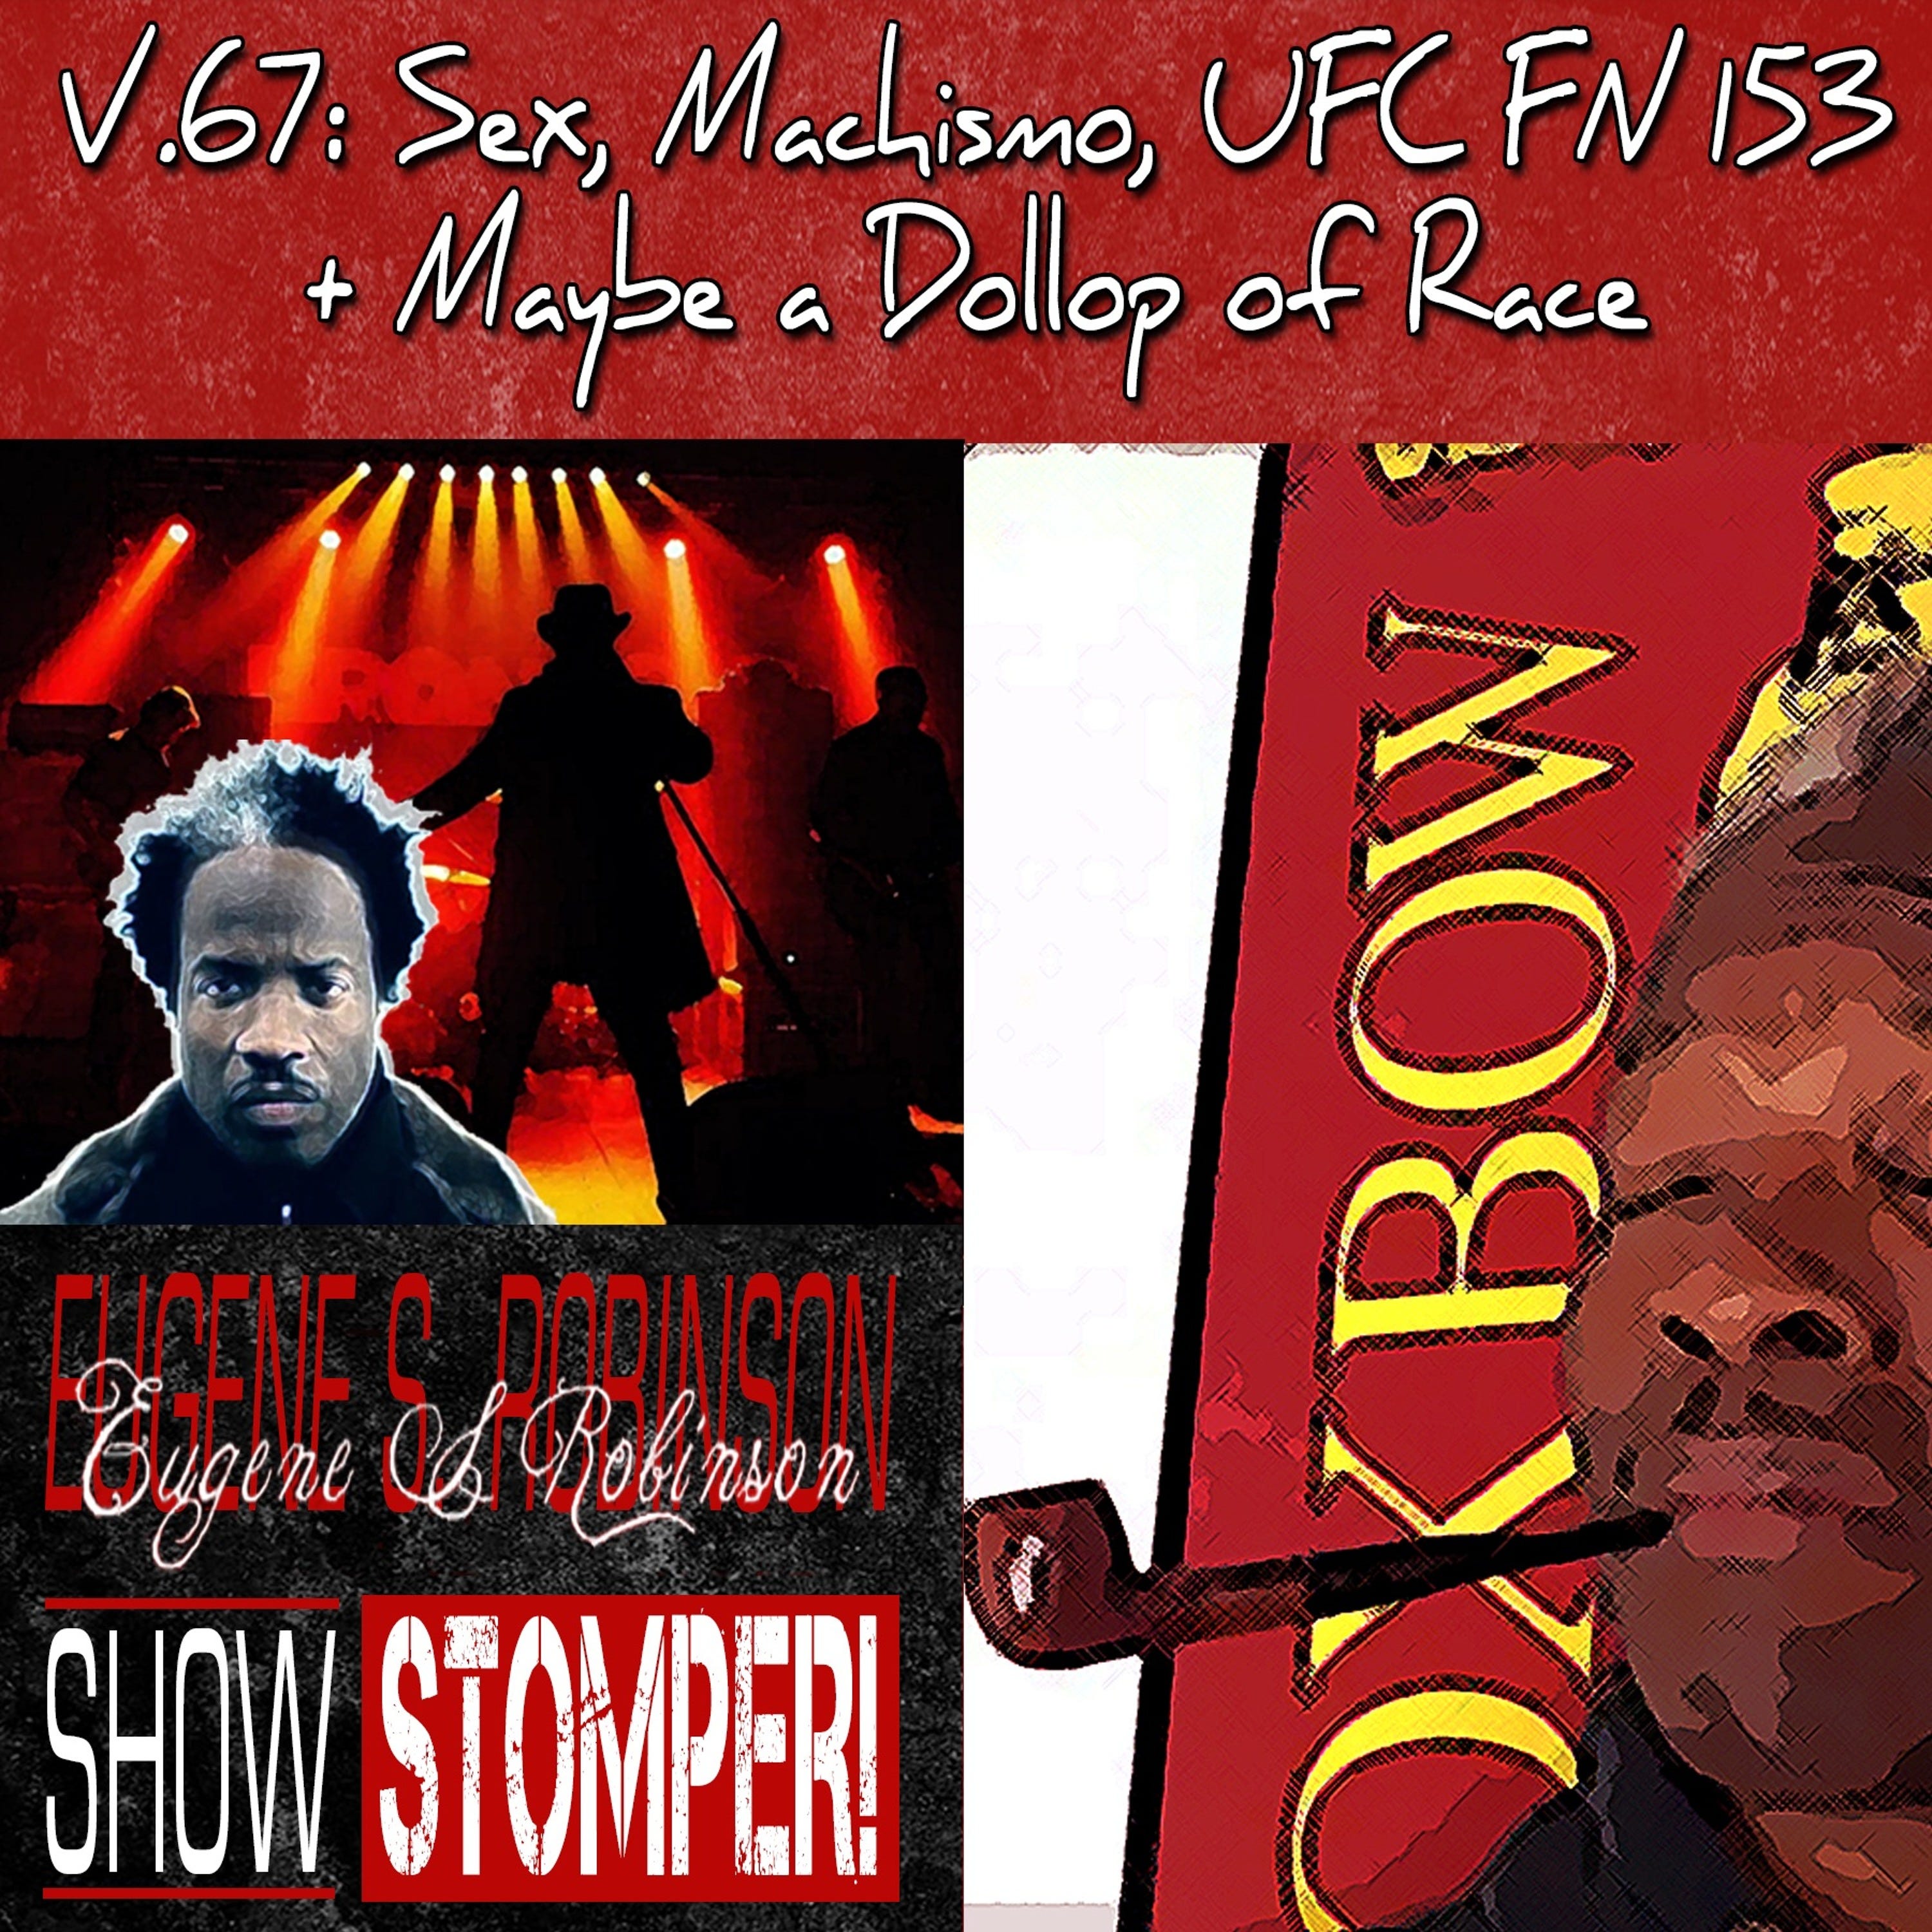 V.67 Sex Machismo UFC FN 153 + Maybe A Dollop Of Race On The Eugene S. Robinson Show Stomper!